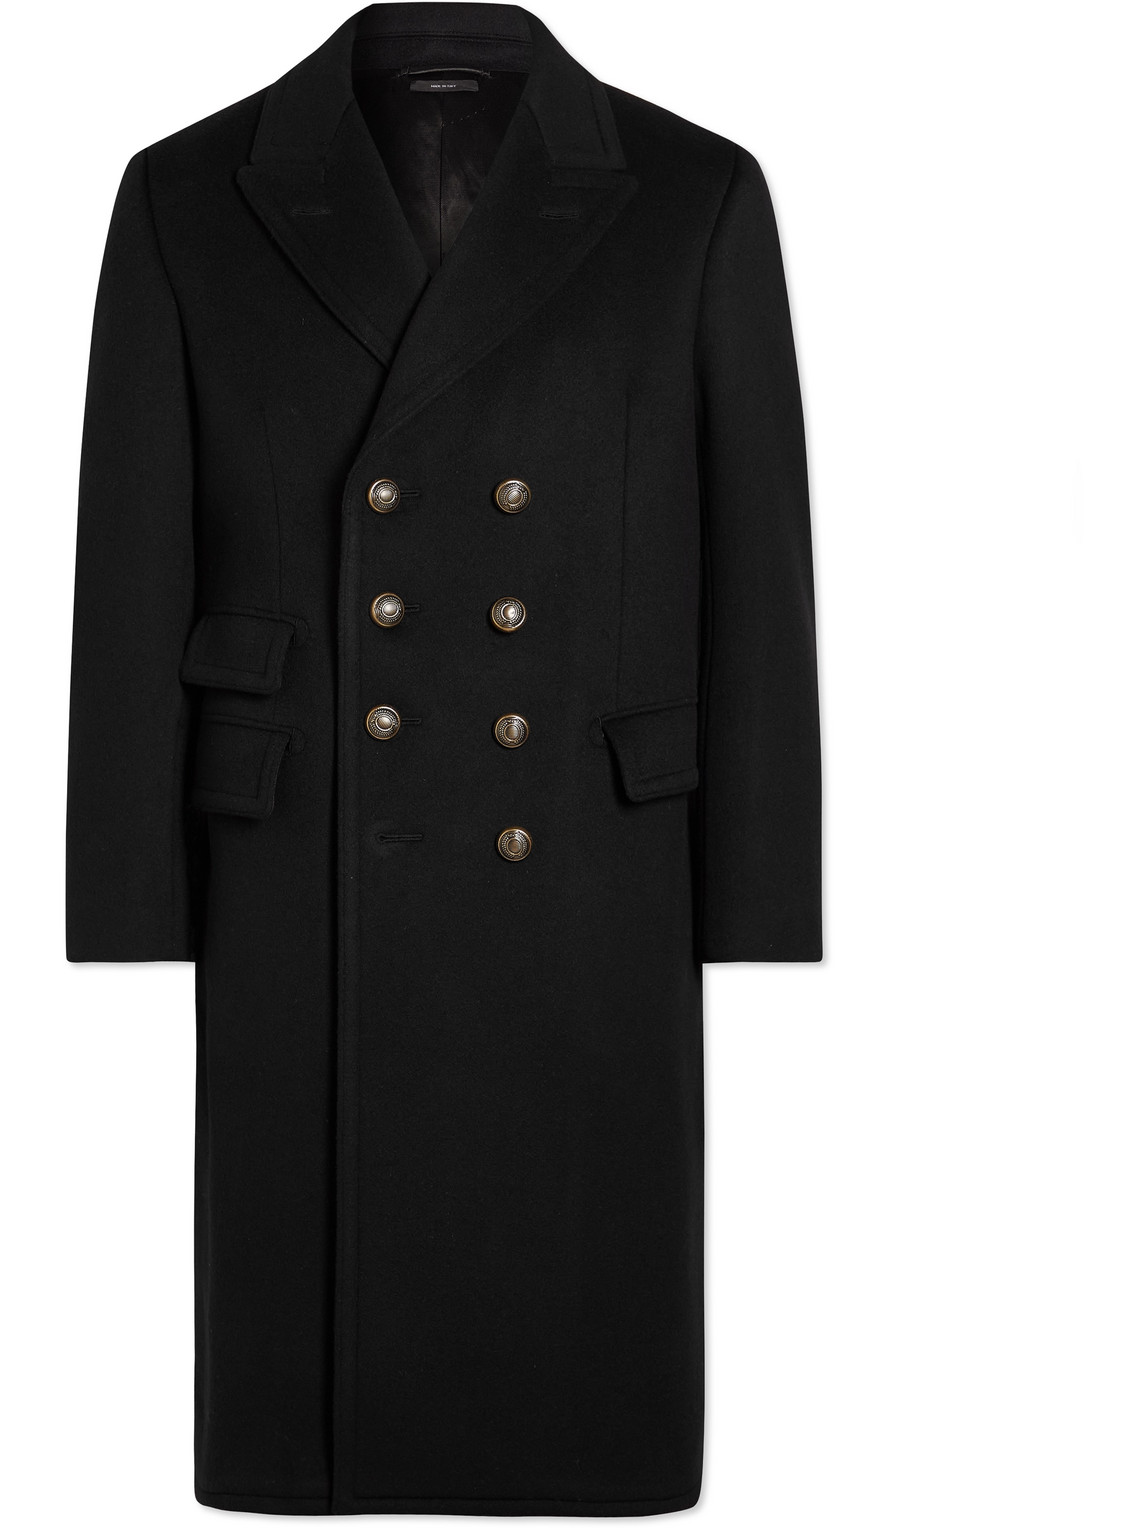 TOM FORD SLIM-FIT DOUBLE-BREASTED WOOL AND CASHMERE-BLEND COAT